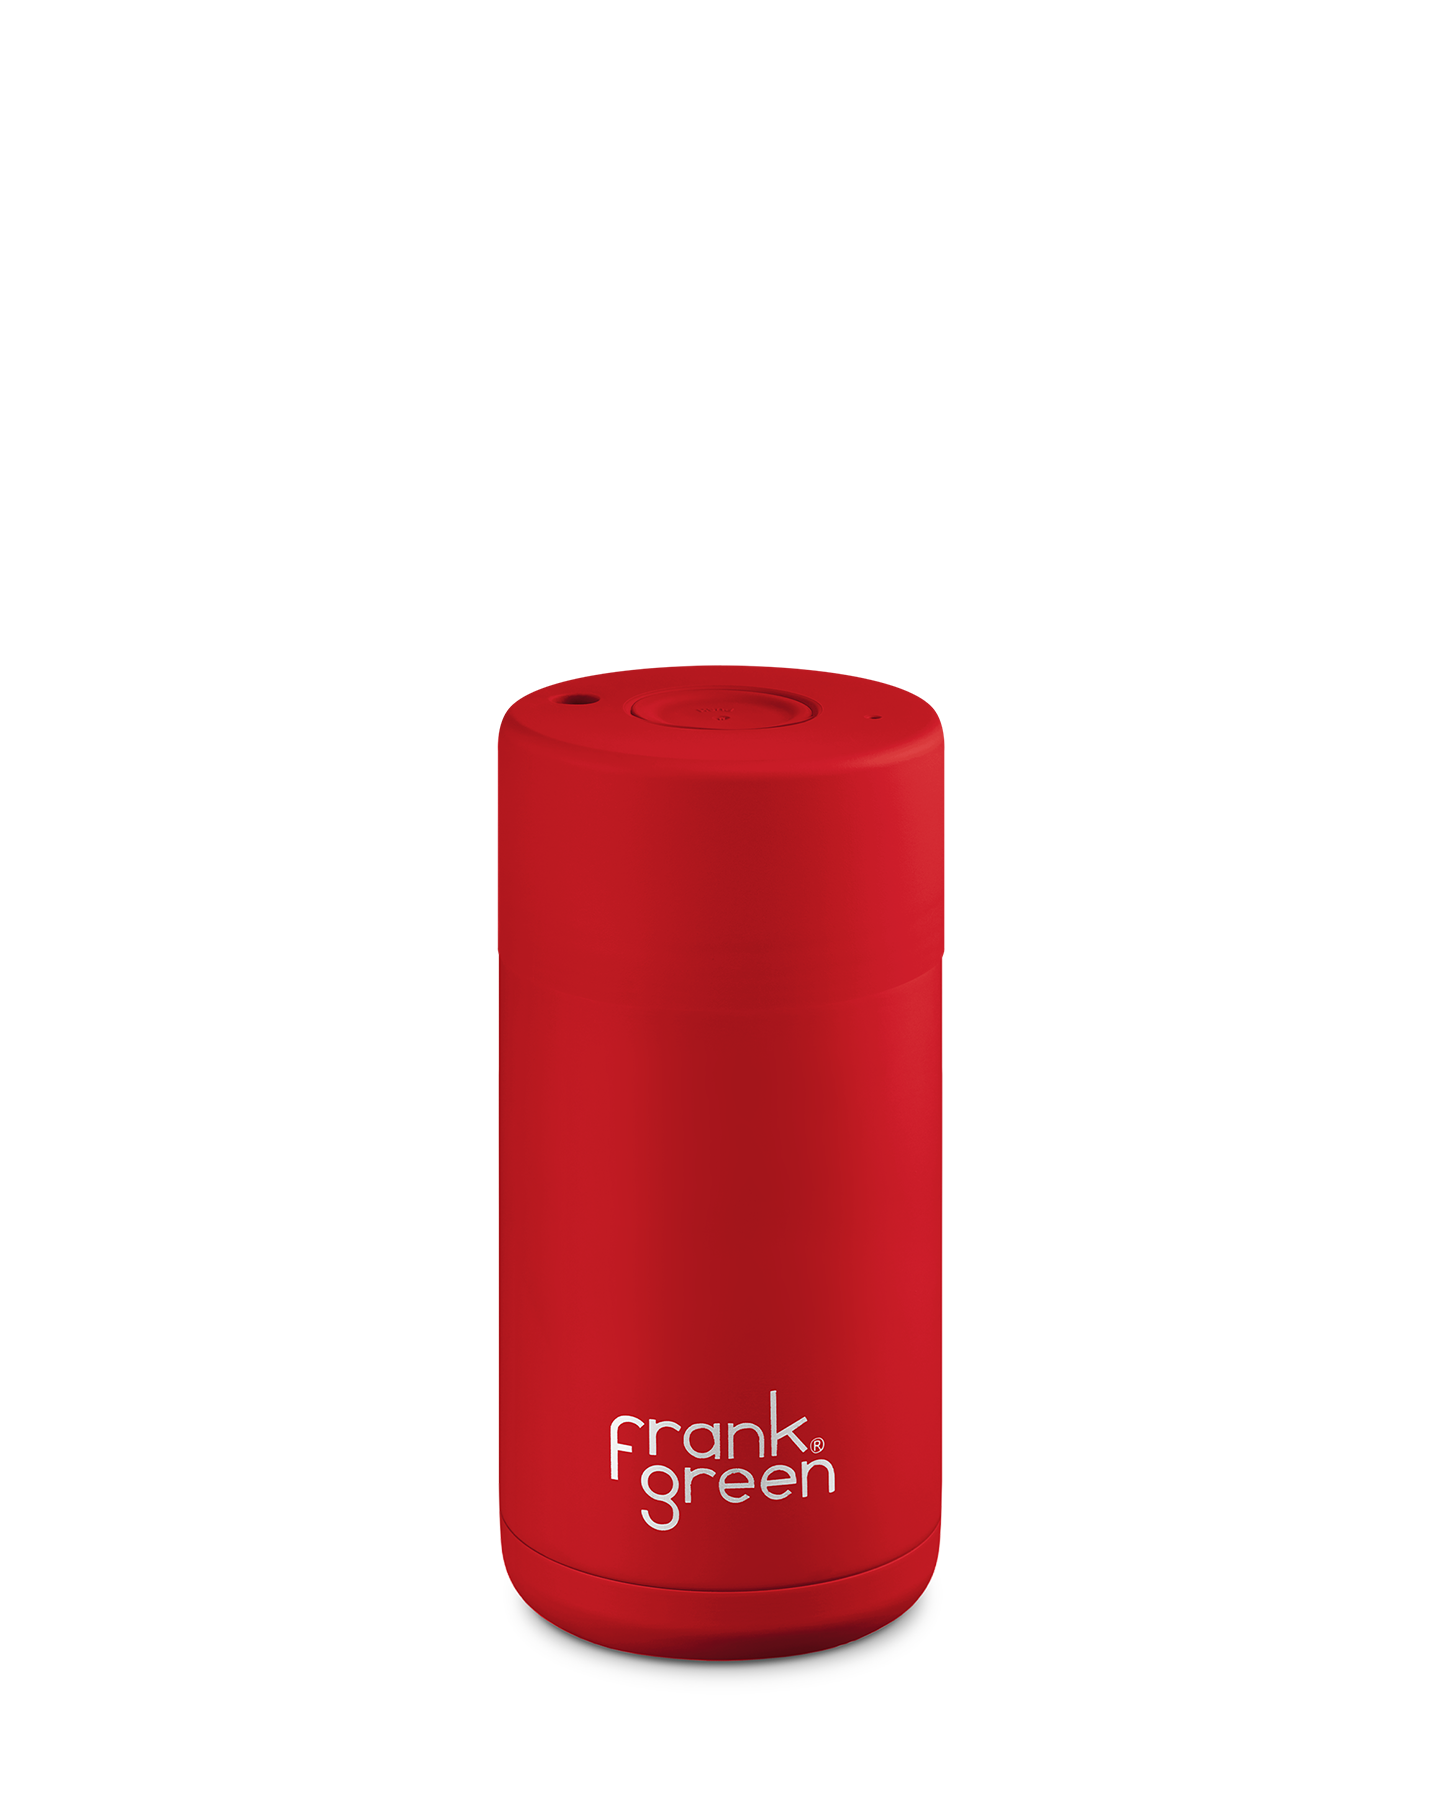 Frank Green Ceramic Reusable Cup 12oz/355ml - Atomic Red